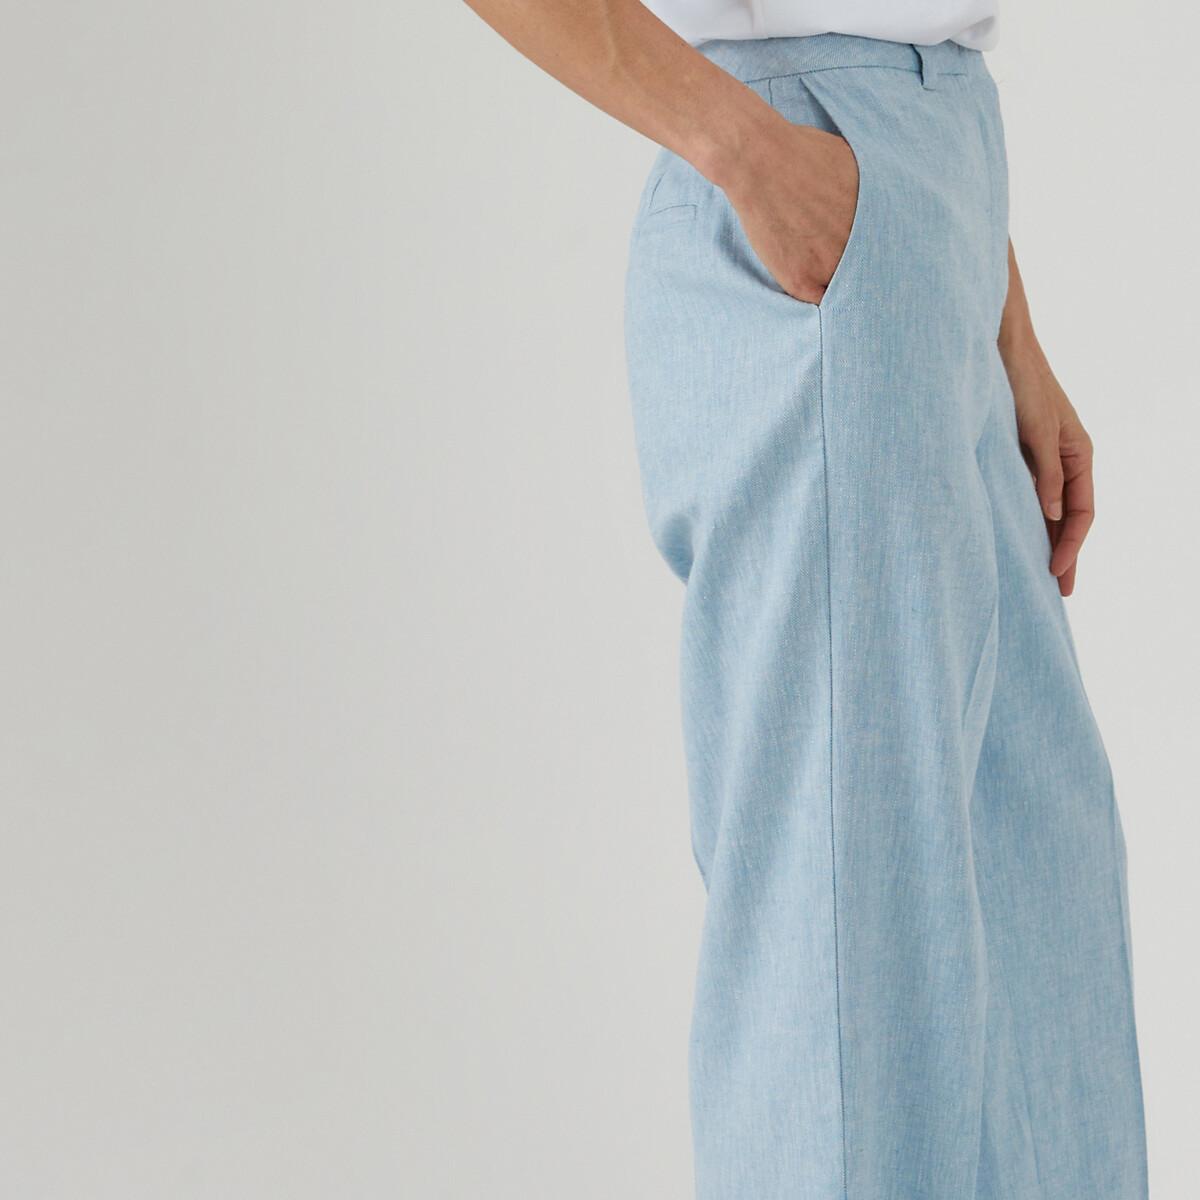 La Redoute Collections  Weite Chambray-Hose aus Leinen/Baumwolle 